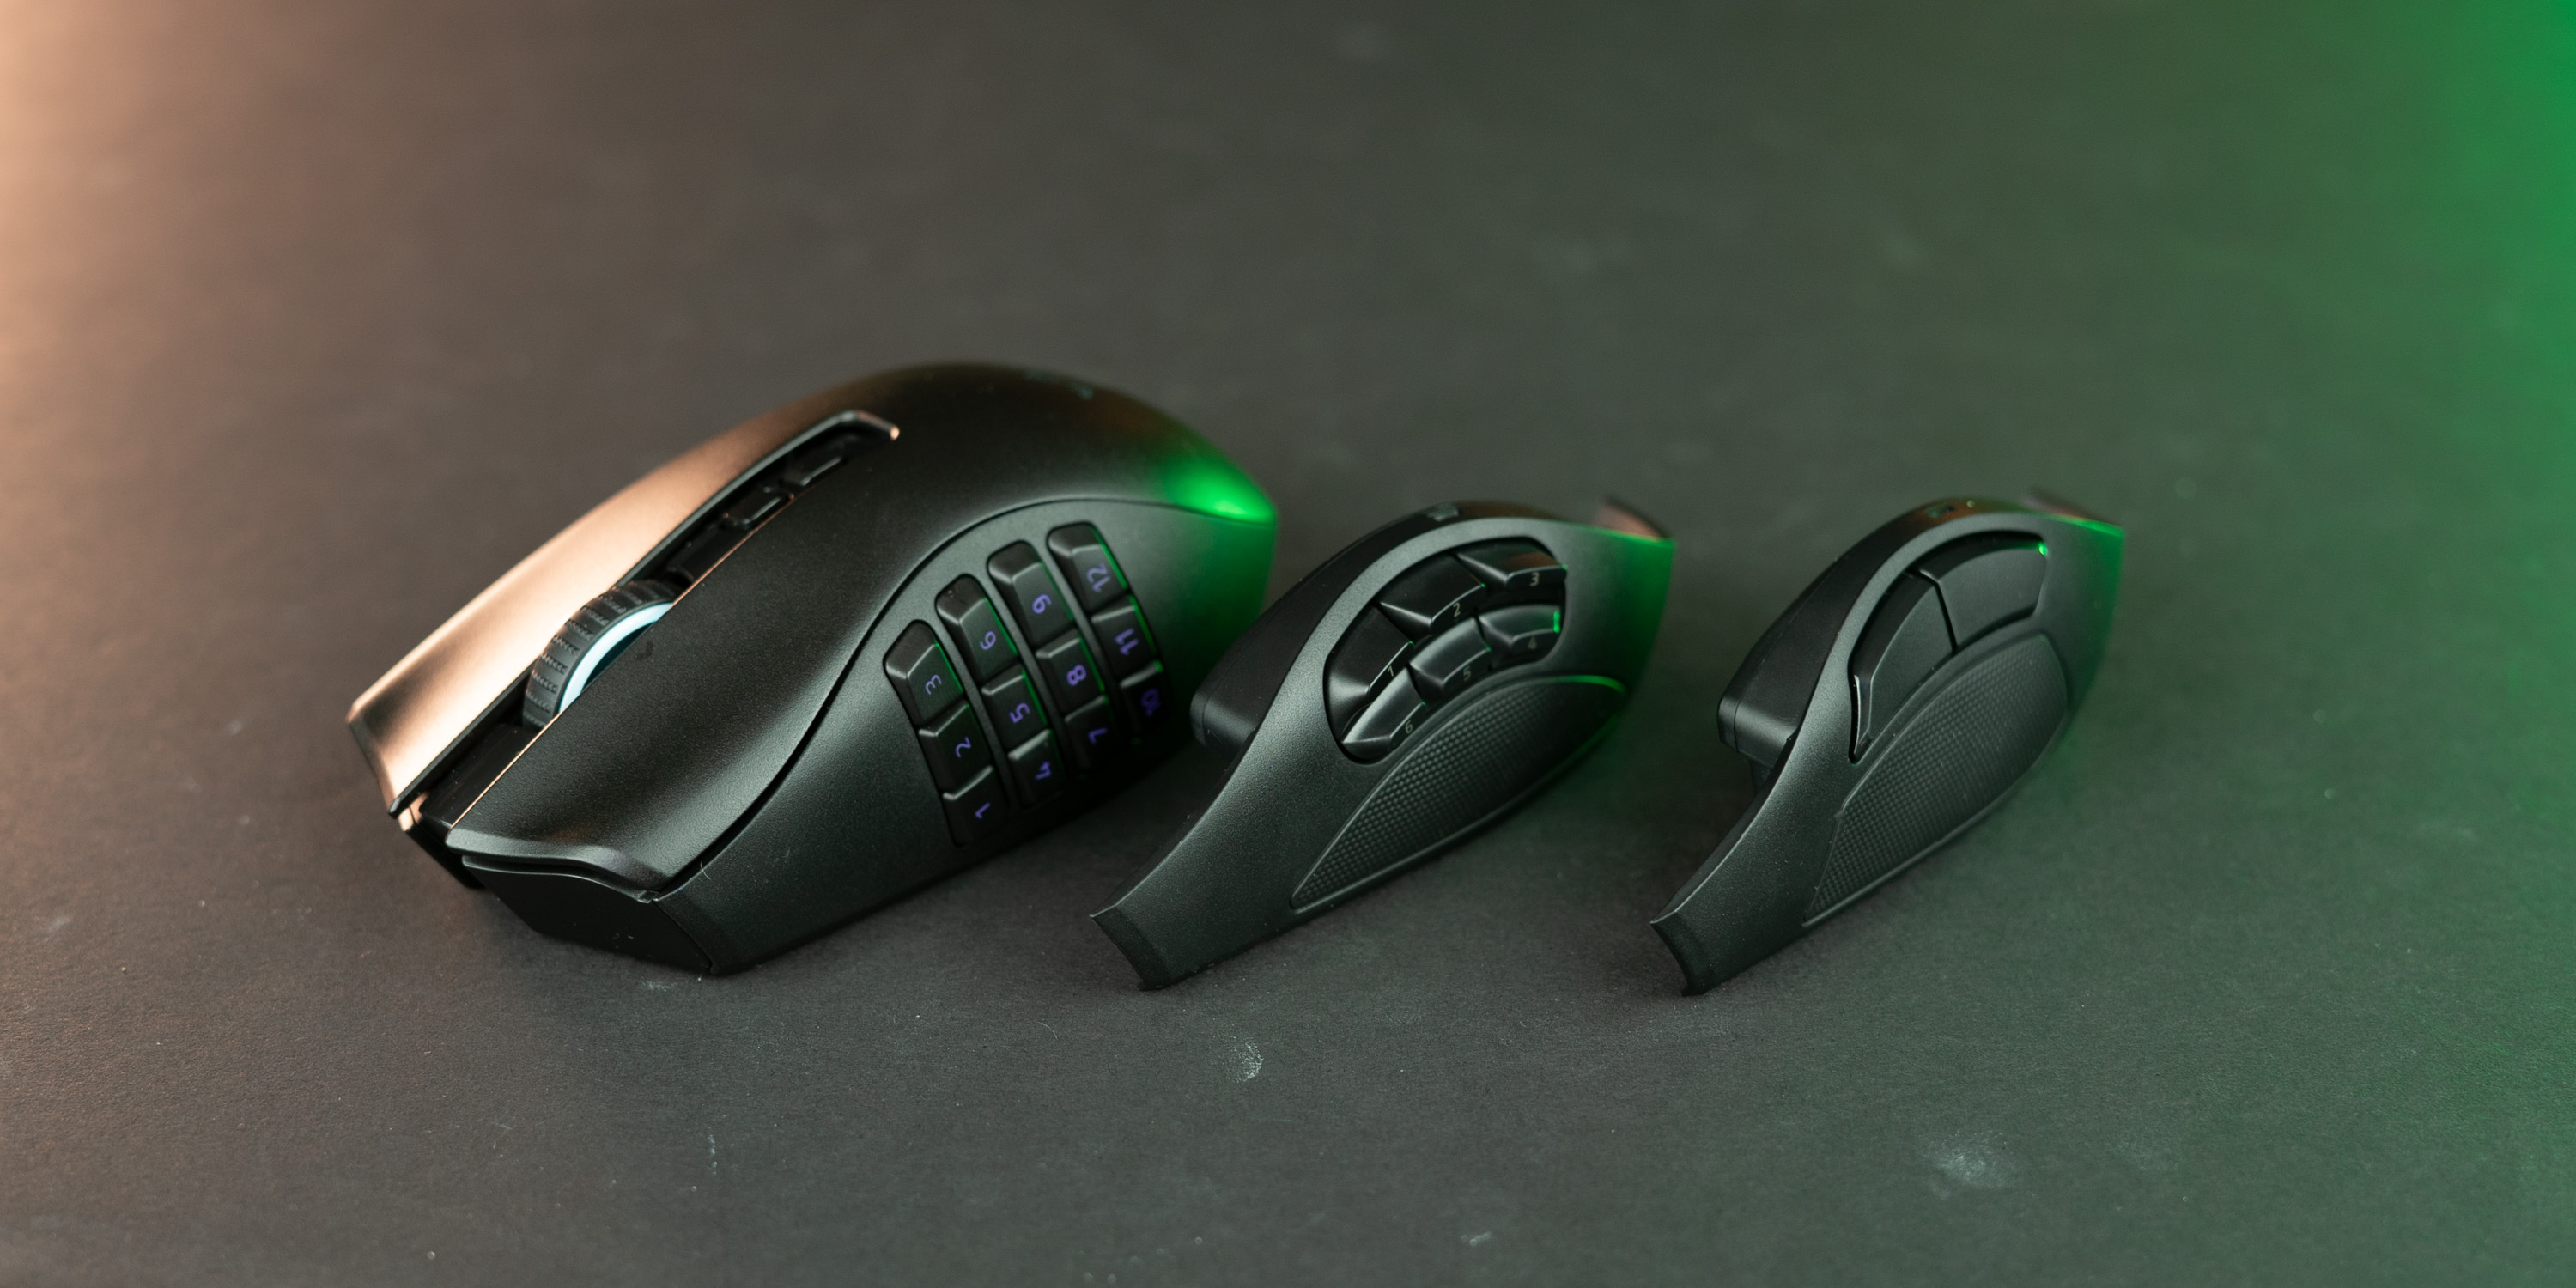 Razer Naga Pro Review - A Highly Customizable Gaming Mouse of Choice